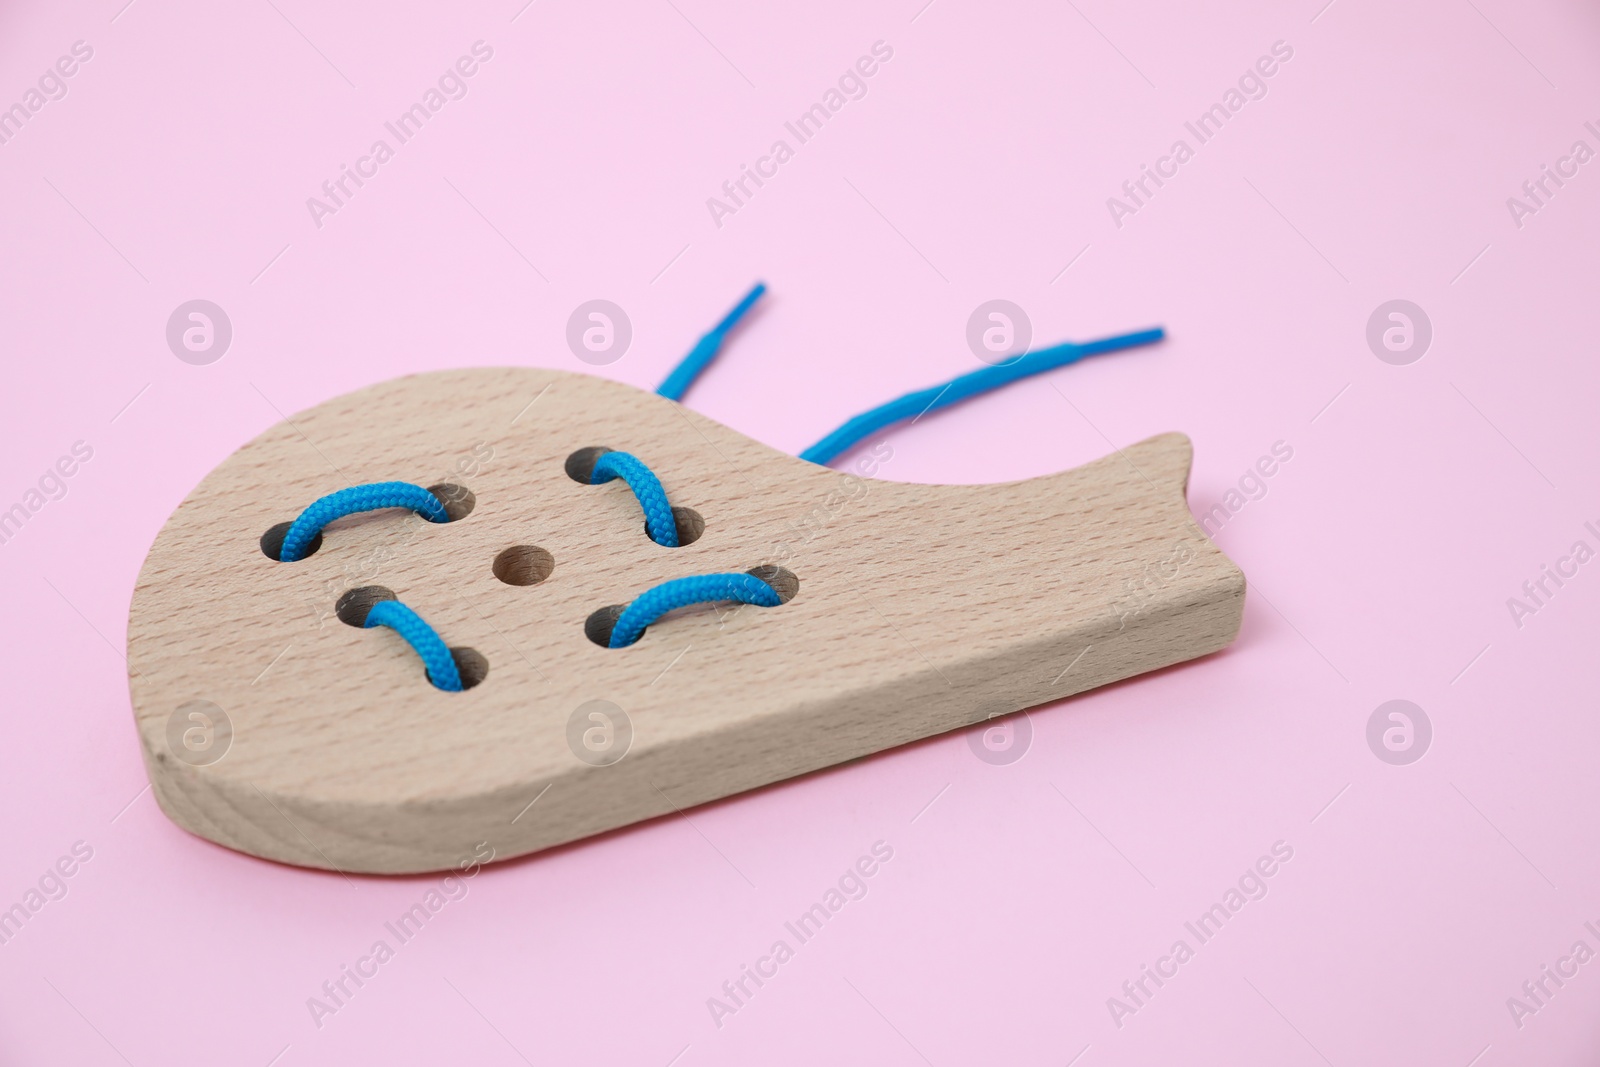 Photo of Wooden whale figure with holes and lace on pink background. Educational toy for motor skills development